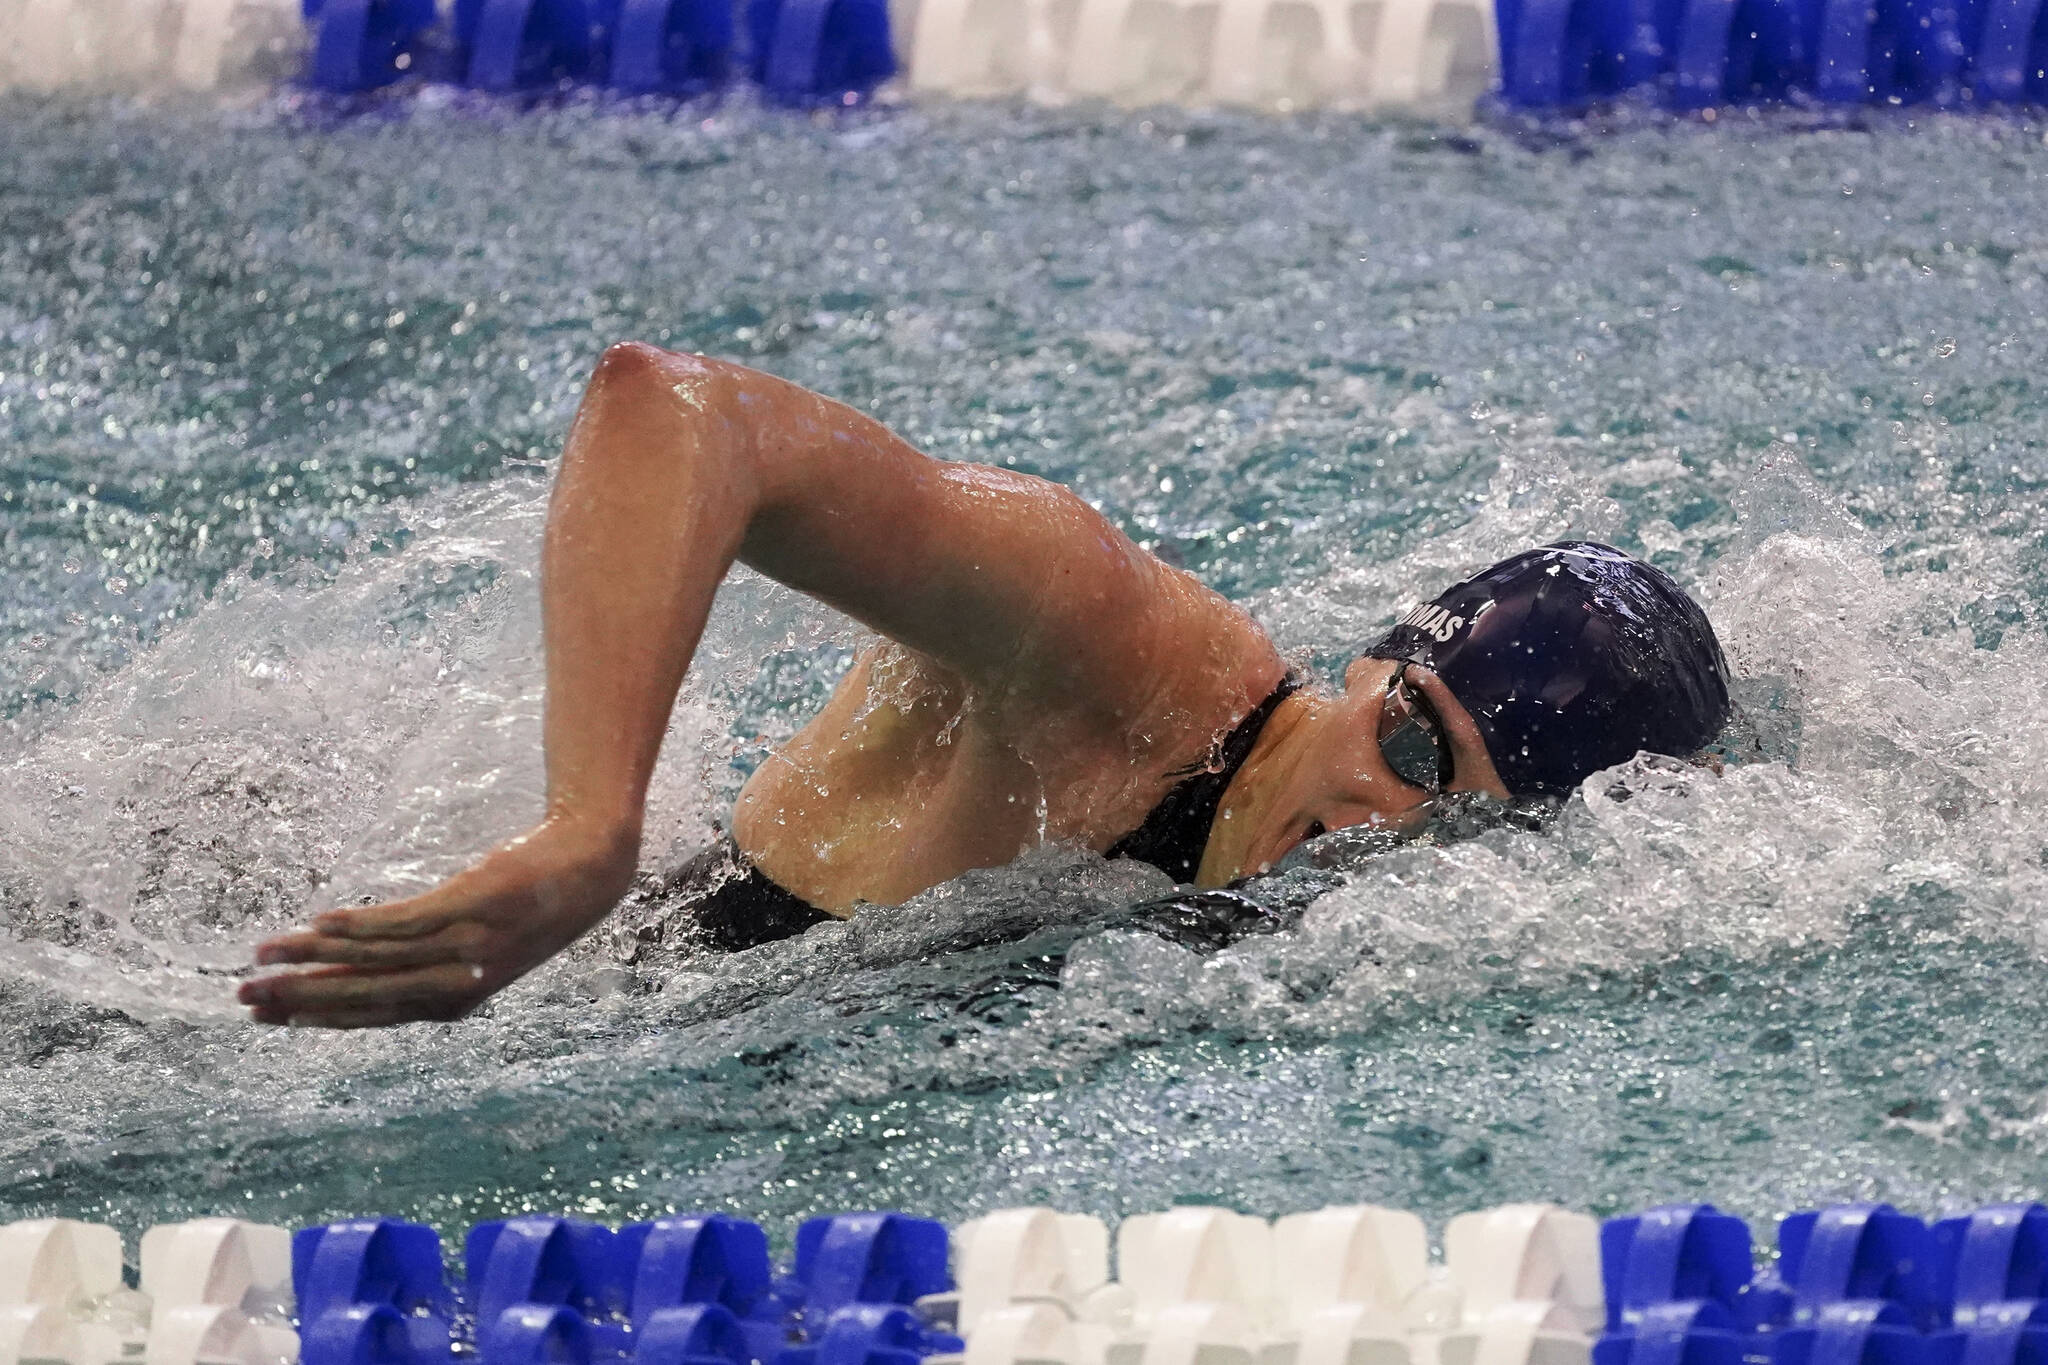 Pennsylvania’s Lia Thomas competes in the 200 freestyle finals at the NCAA Swimming and Diving Championships Friday, March 18, 2022, at Georgia Tech in Atlanta. Thomas finished tied for fifth place. (AP Photo/John Bazemore)